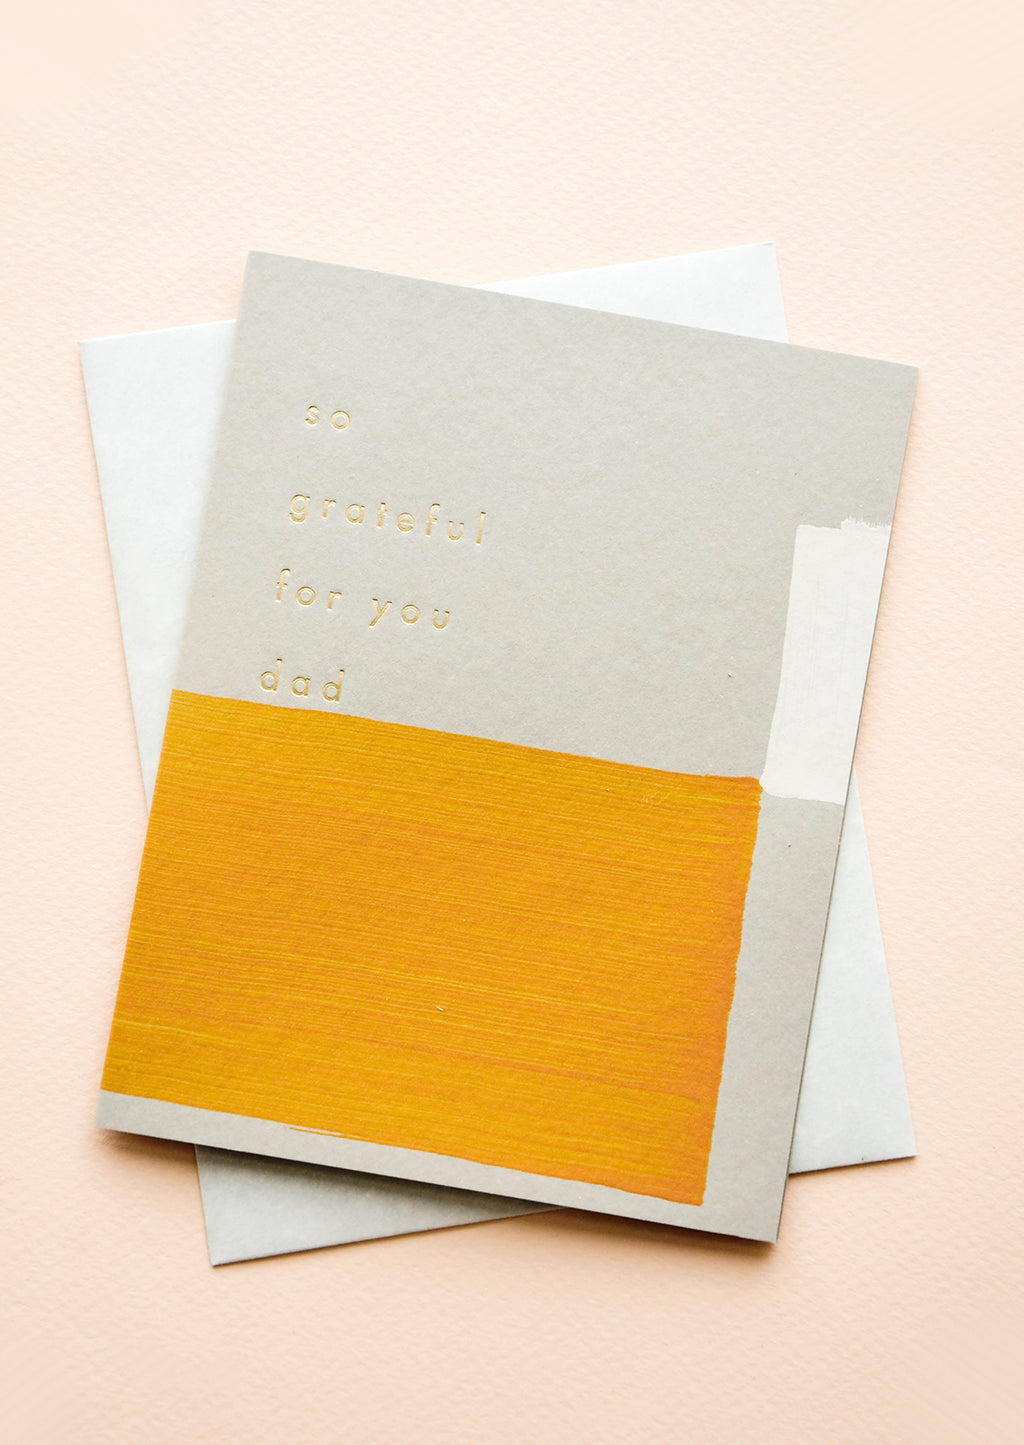 1: Greeting card with hand-painted square shapes in mustard and white, gold text reads "So grateful for you dad"